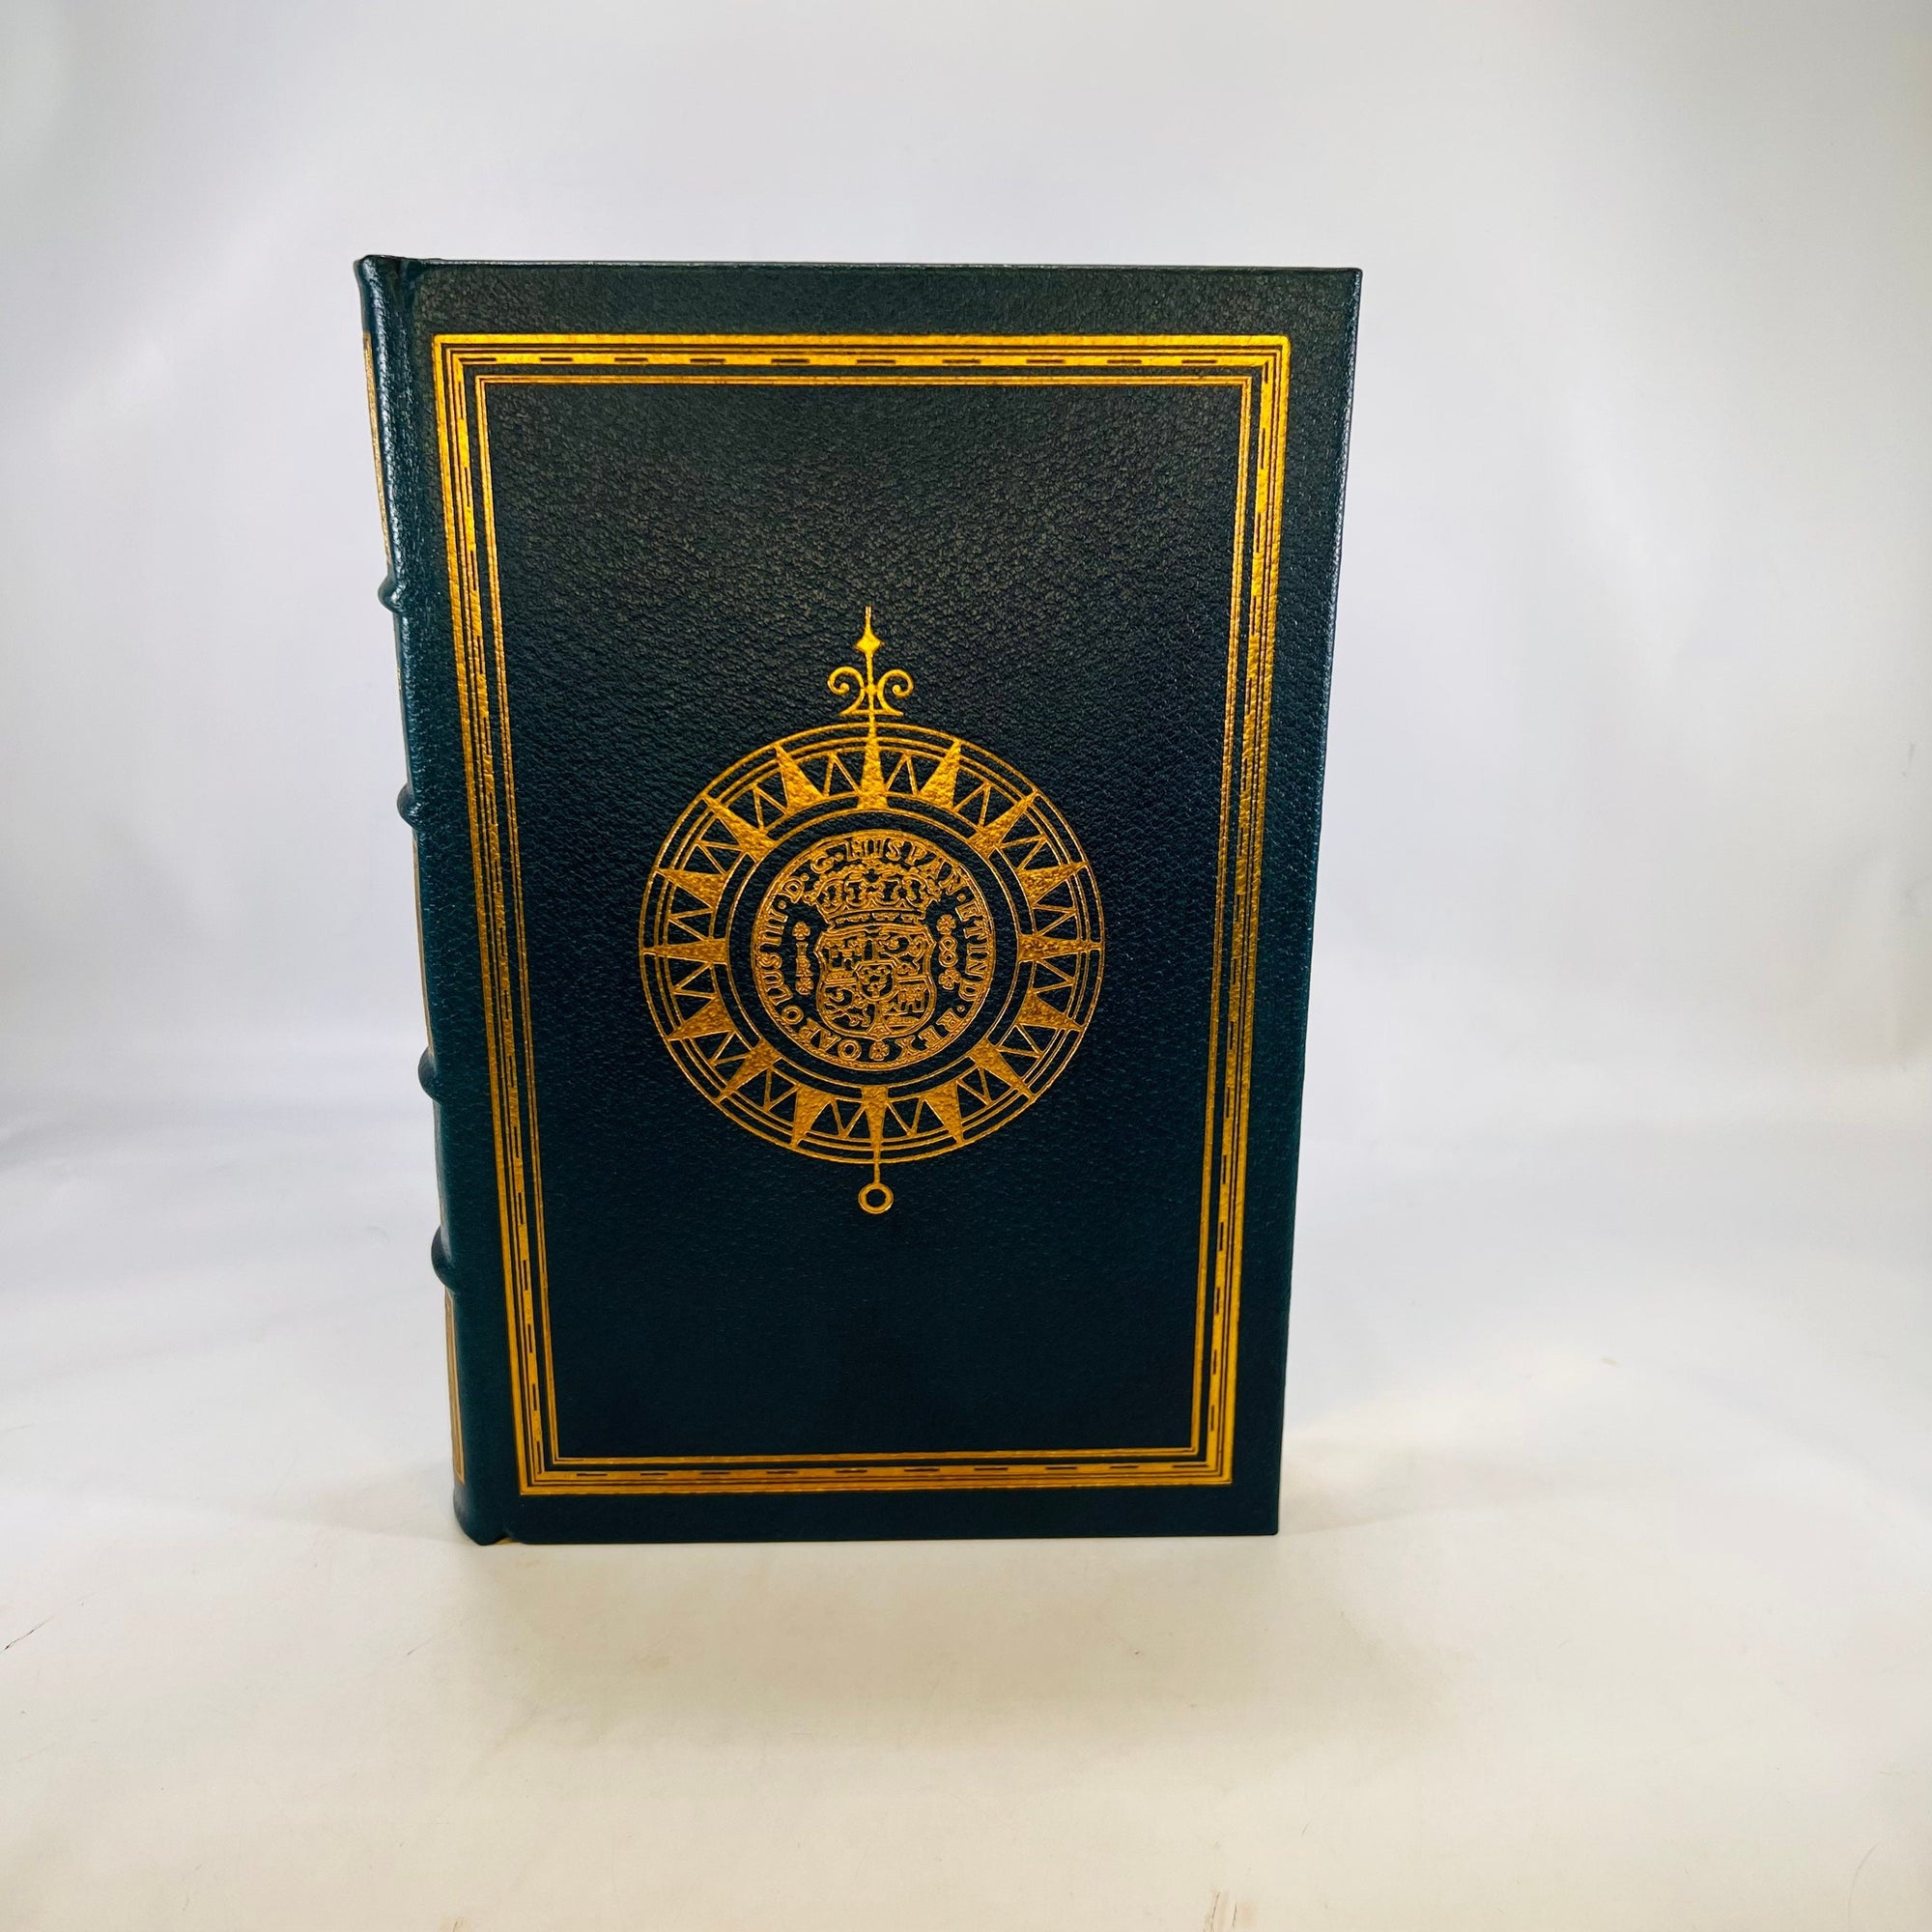 Treasure Island by Robert Lewis Stevenson 1977 Vintage Classic Easton Press Collectable Leather Bound Adventure Book Gold Gilt Pages